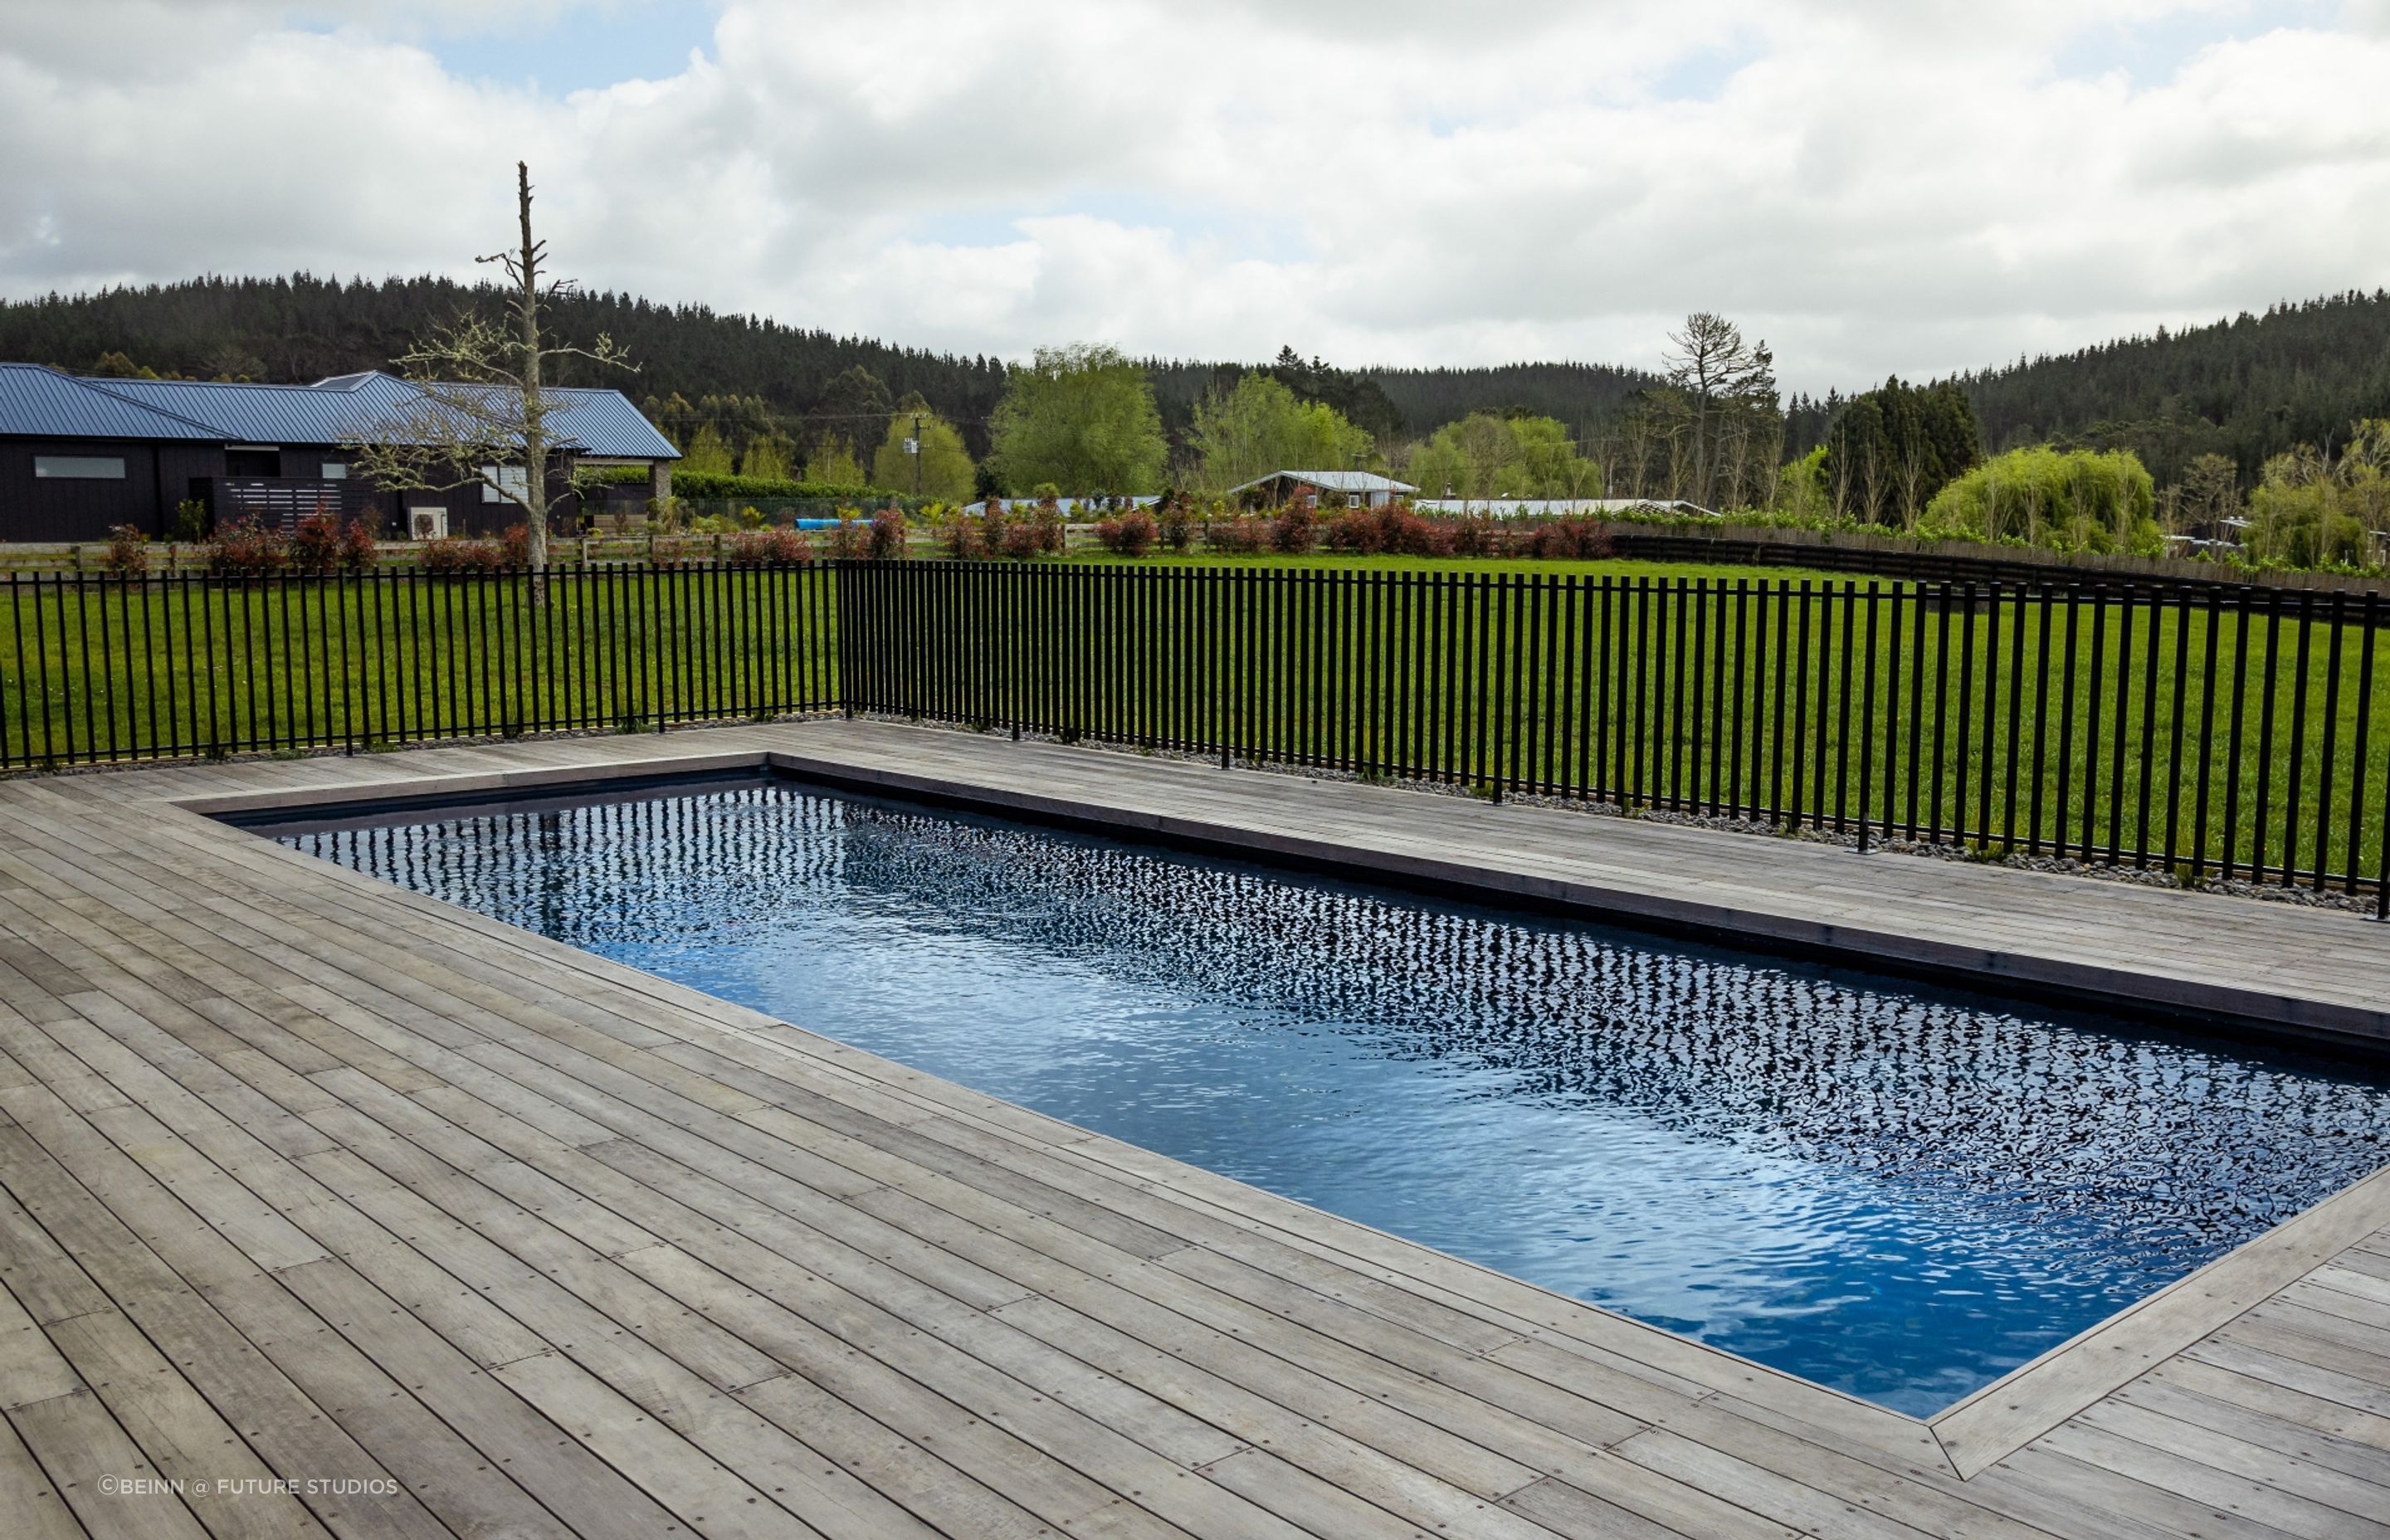 The new pool was a key part of the client's brief and the laidback rural lifestyle.